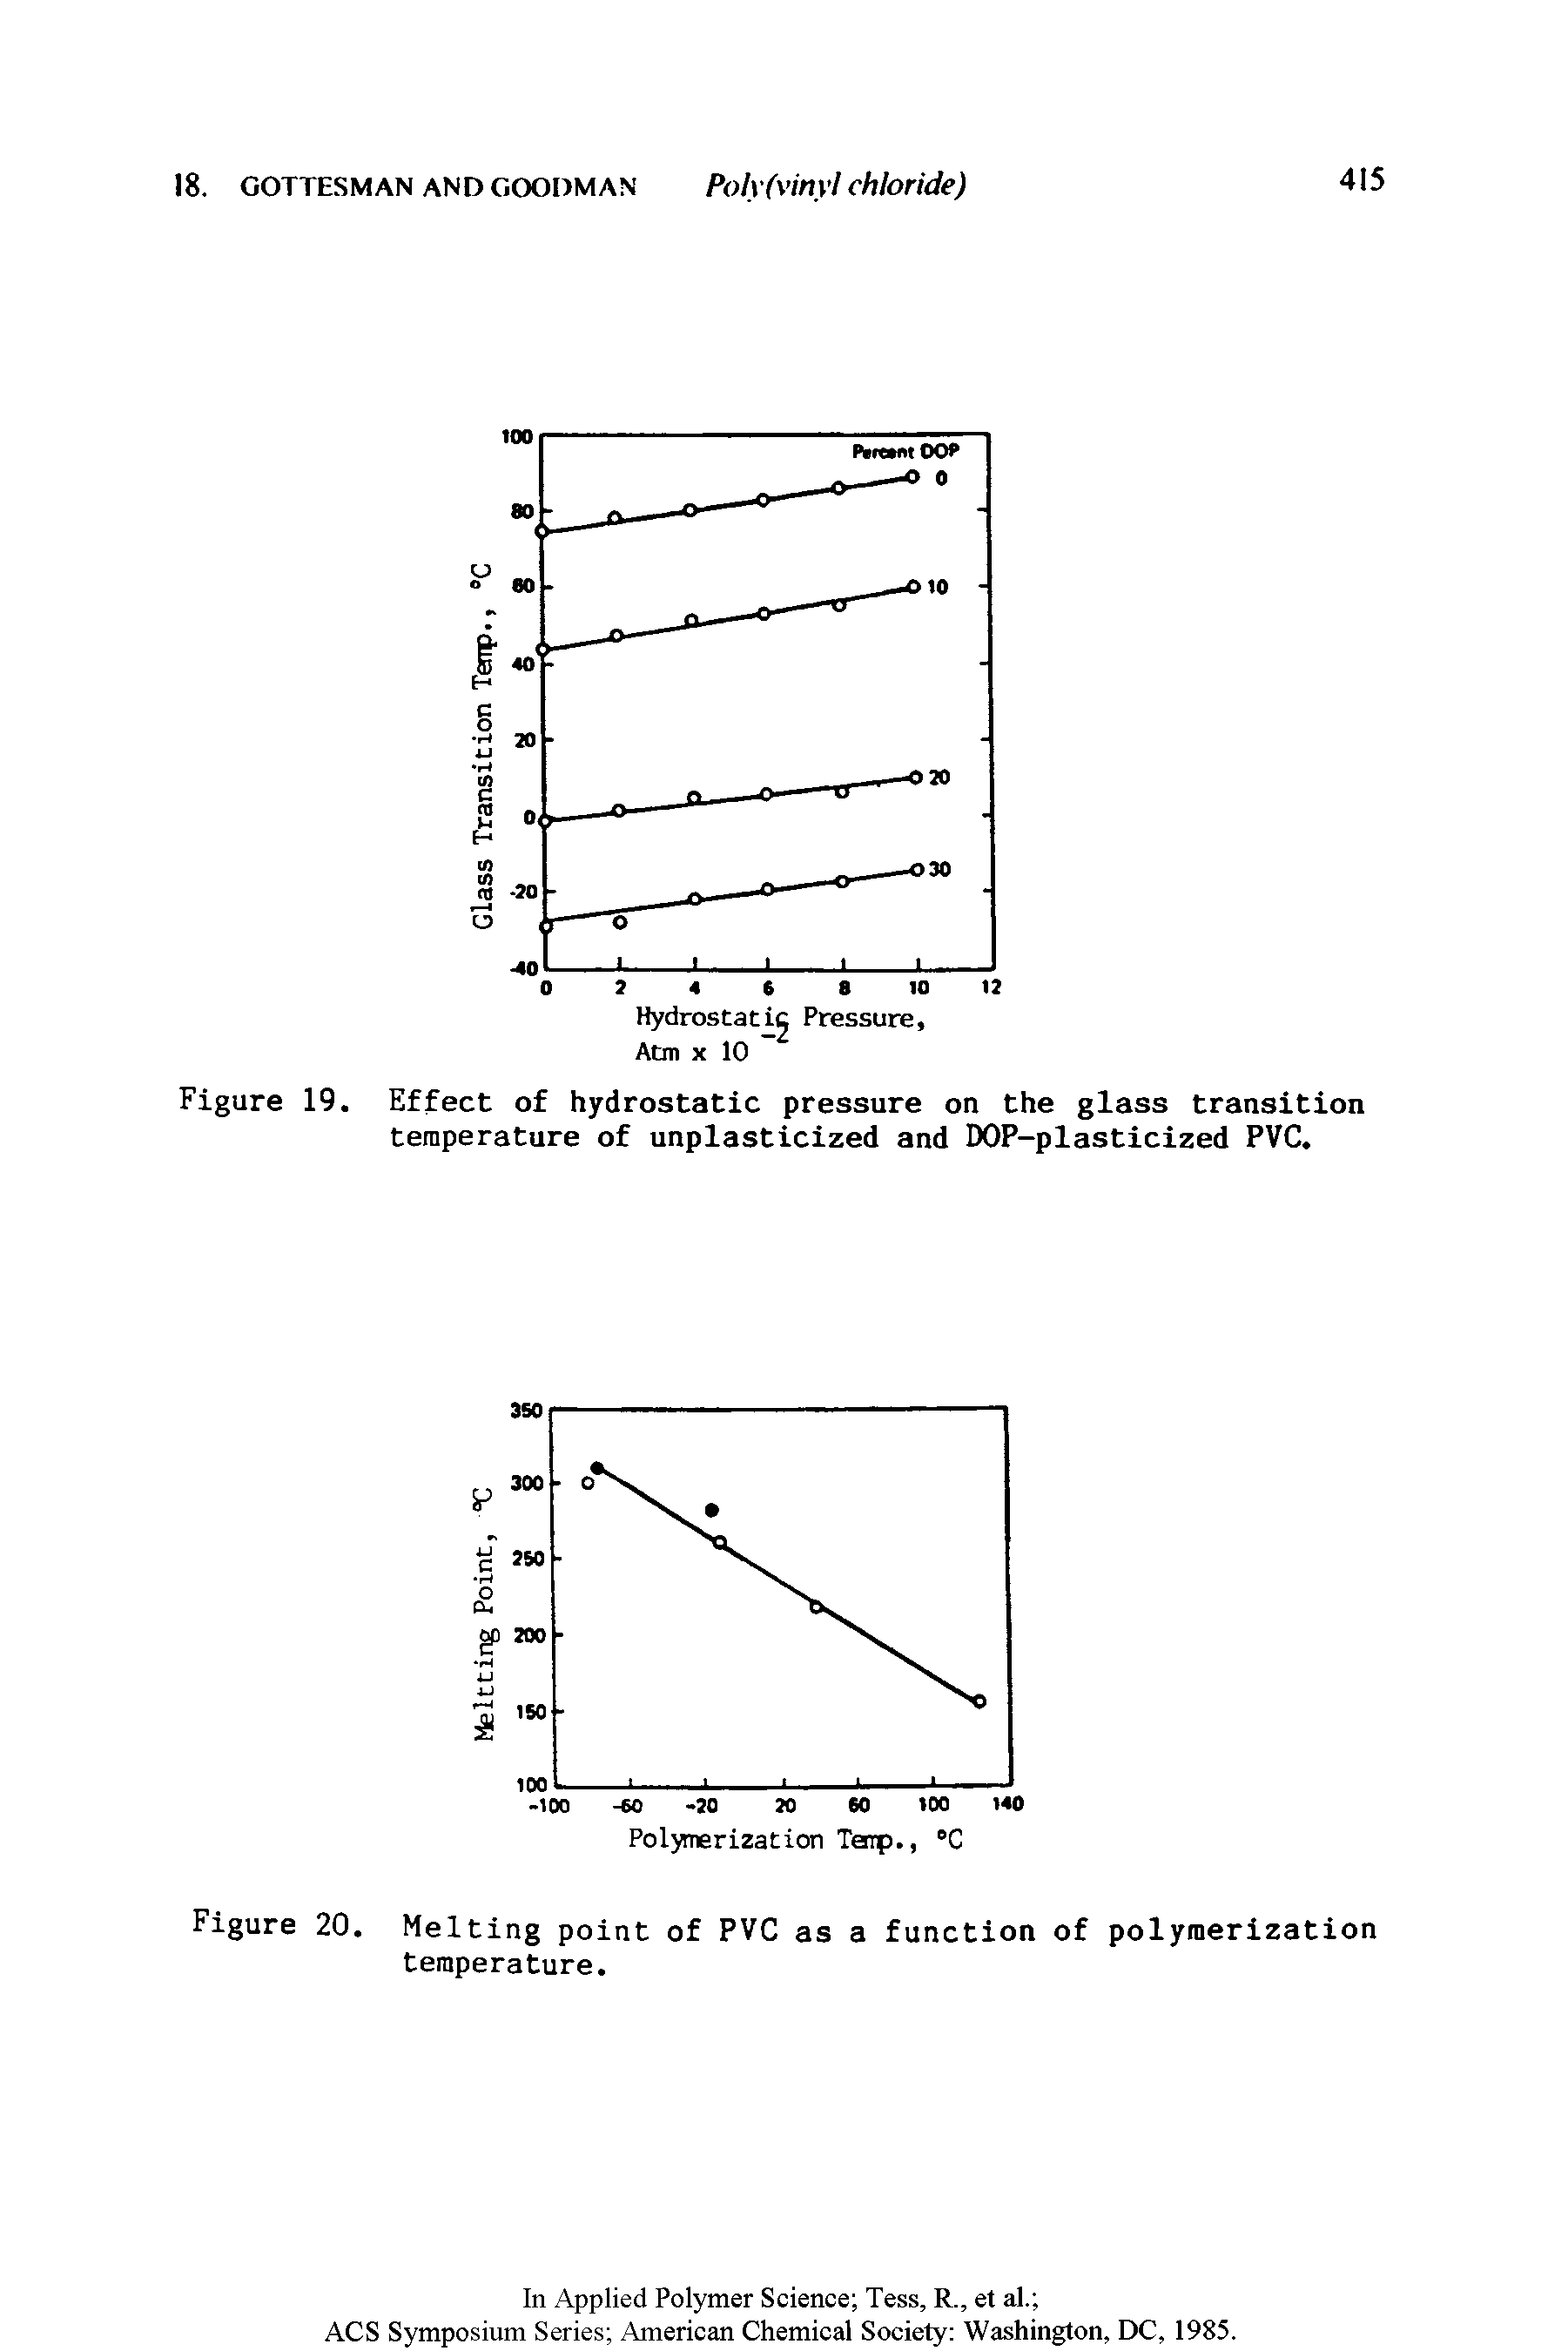 Figure 19. Effect of hydrostatic pressure on the glass transition temperature of unplasticized and DOP-plasticized PVC.